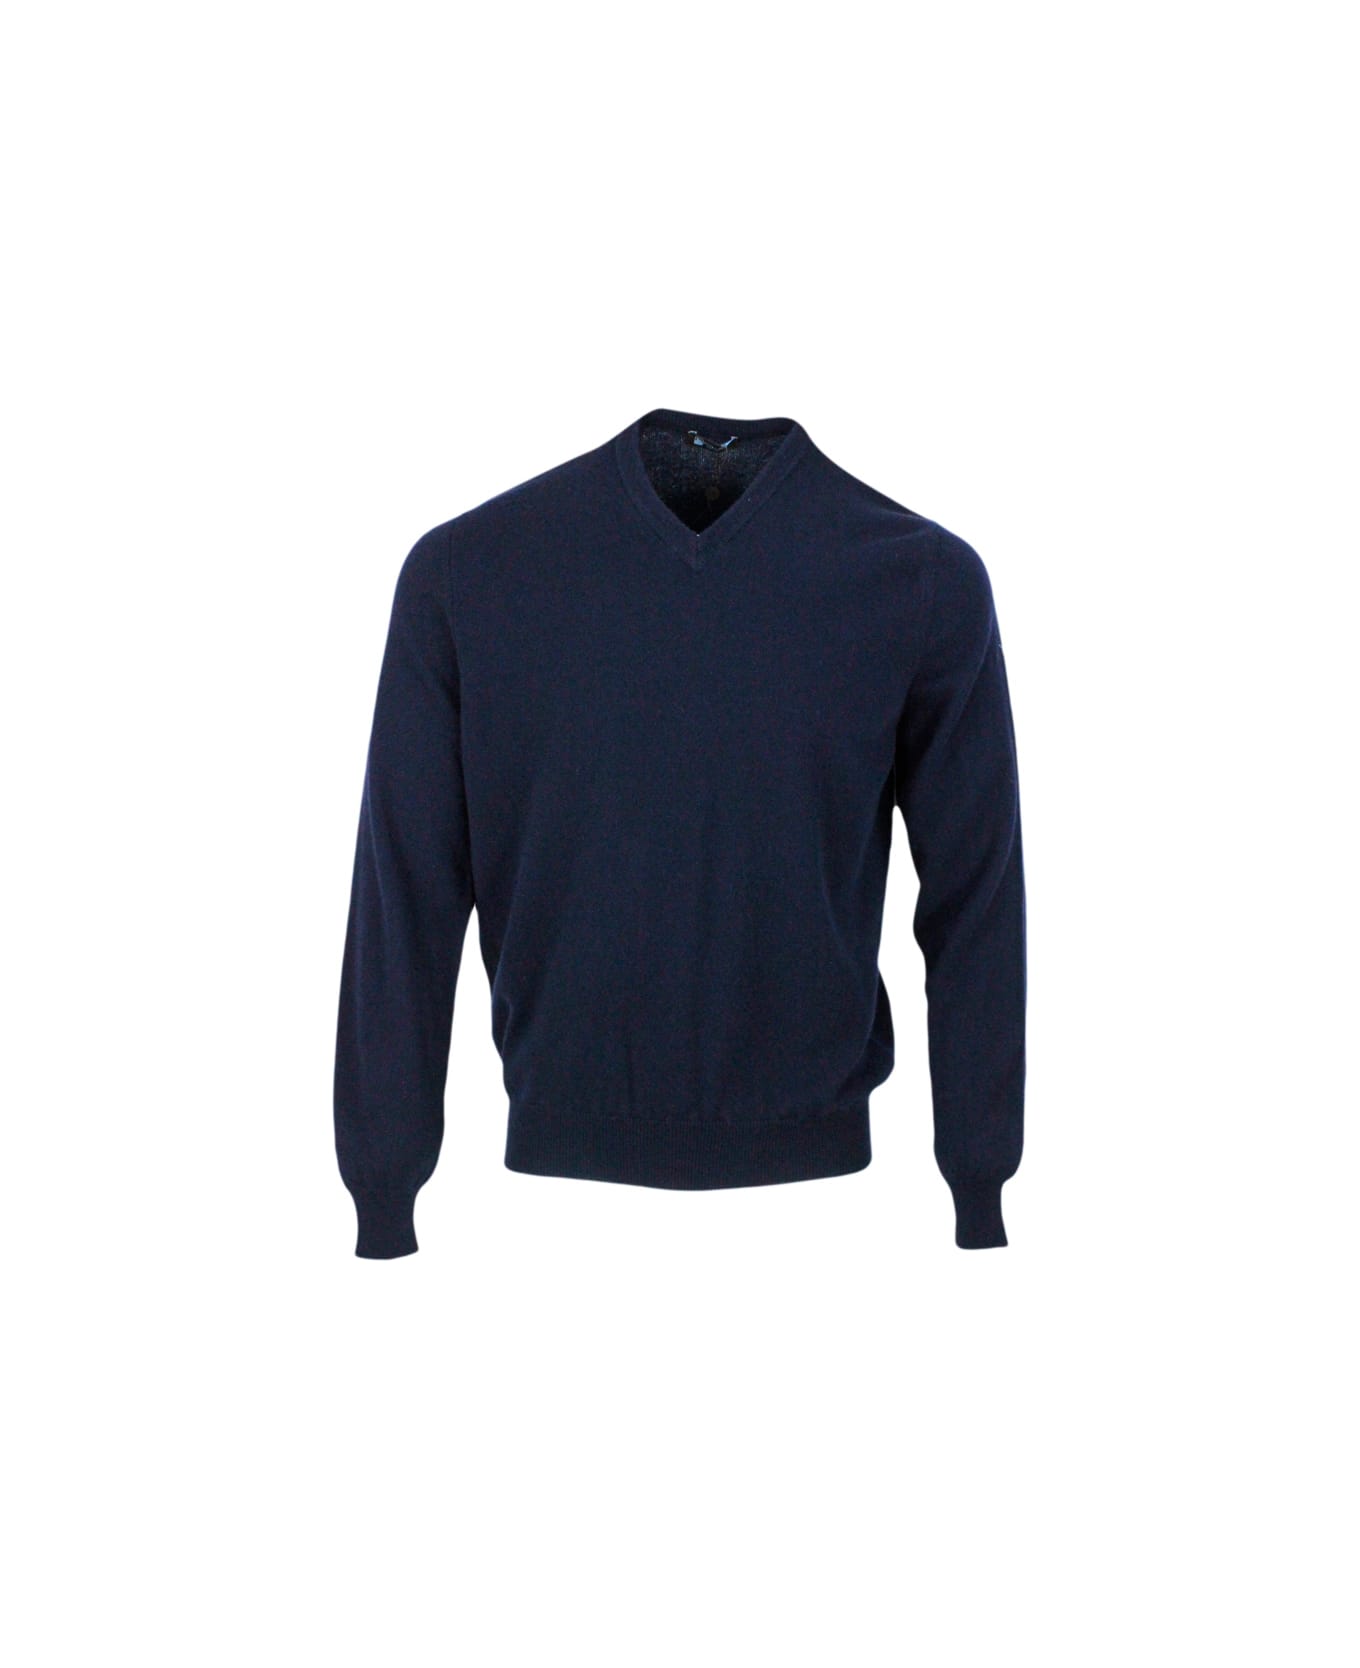 Colombo Long-sleeved V-neck Sweater In Fine 2-ply 100% Kid Cashmere With Special Processing On The Edge Of The Neck - Blu navy